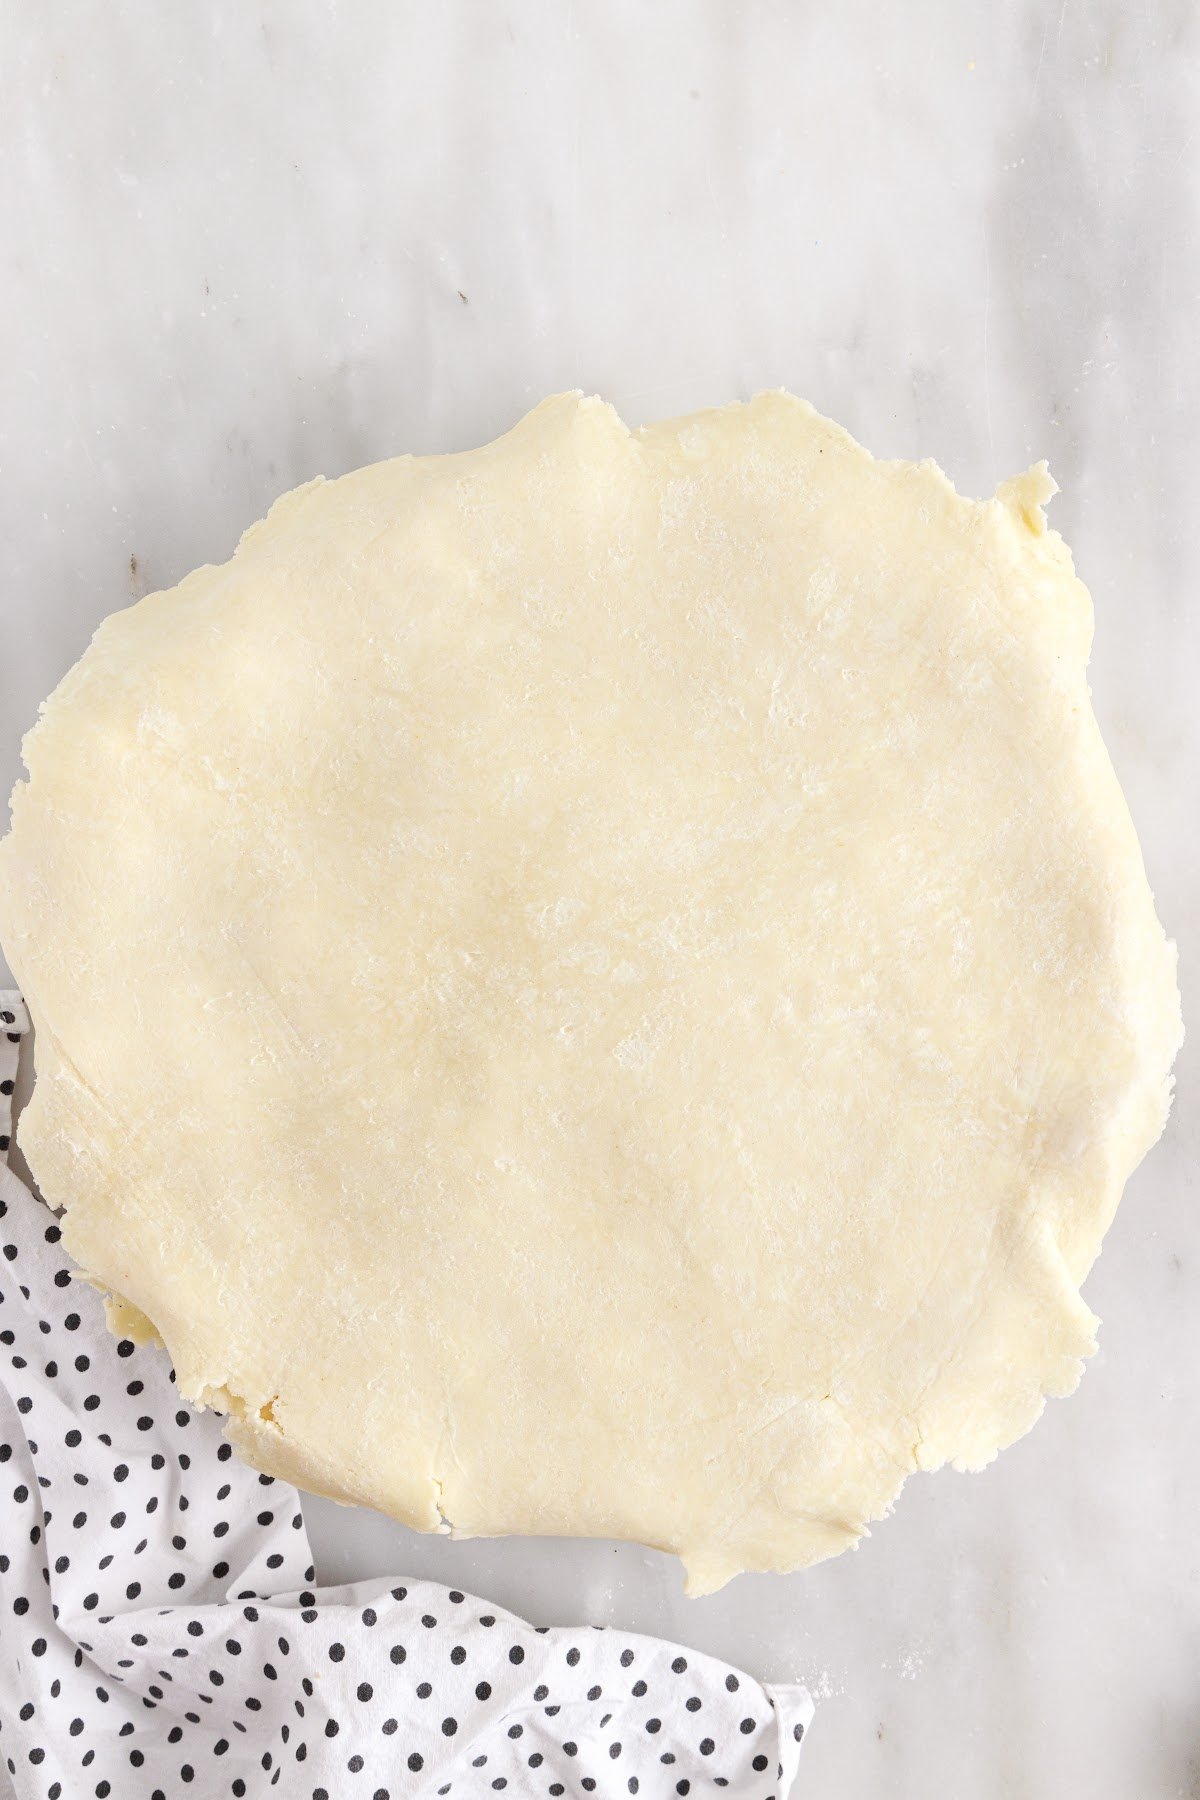 Rolled out top pie dough.